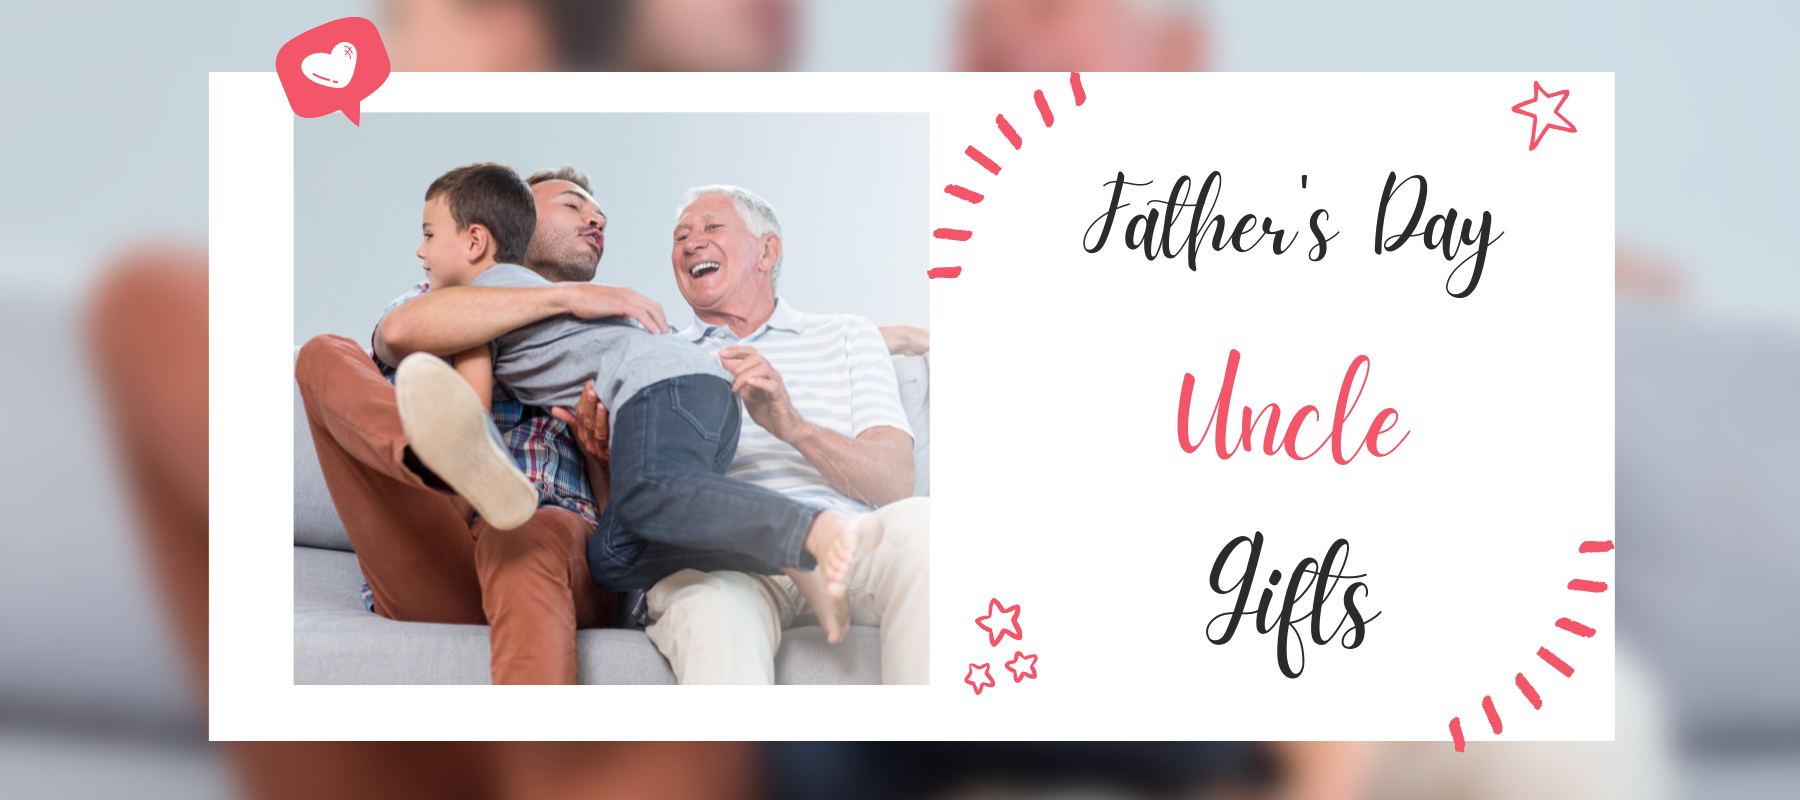 Top 20 Gifts on Father's Day Gifts for Uncle That Make You The Favorite Niece or Nephew